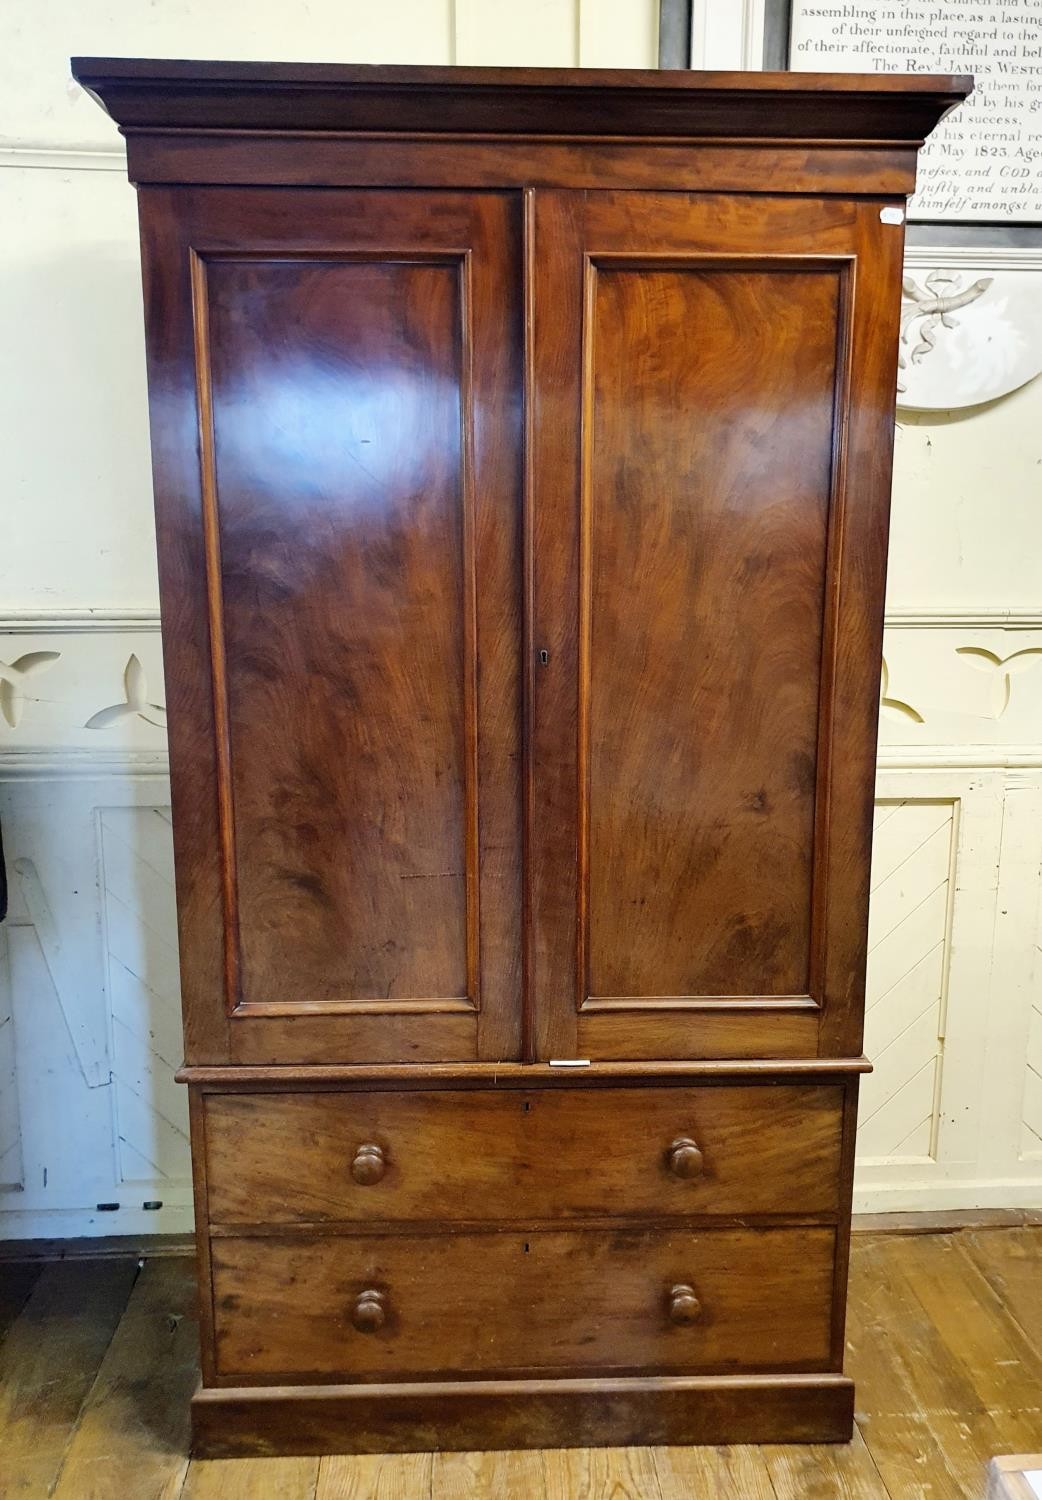 A 19th Century mahogany linen press, two cupboard doors to reveal shelves, on a base with two